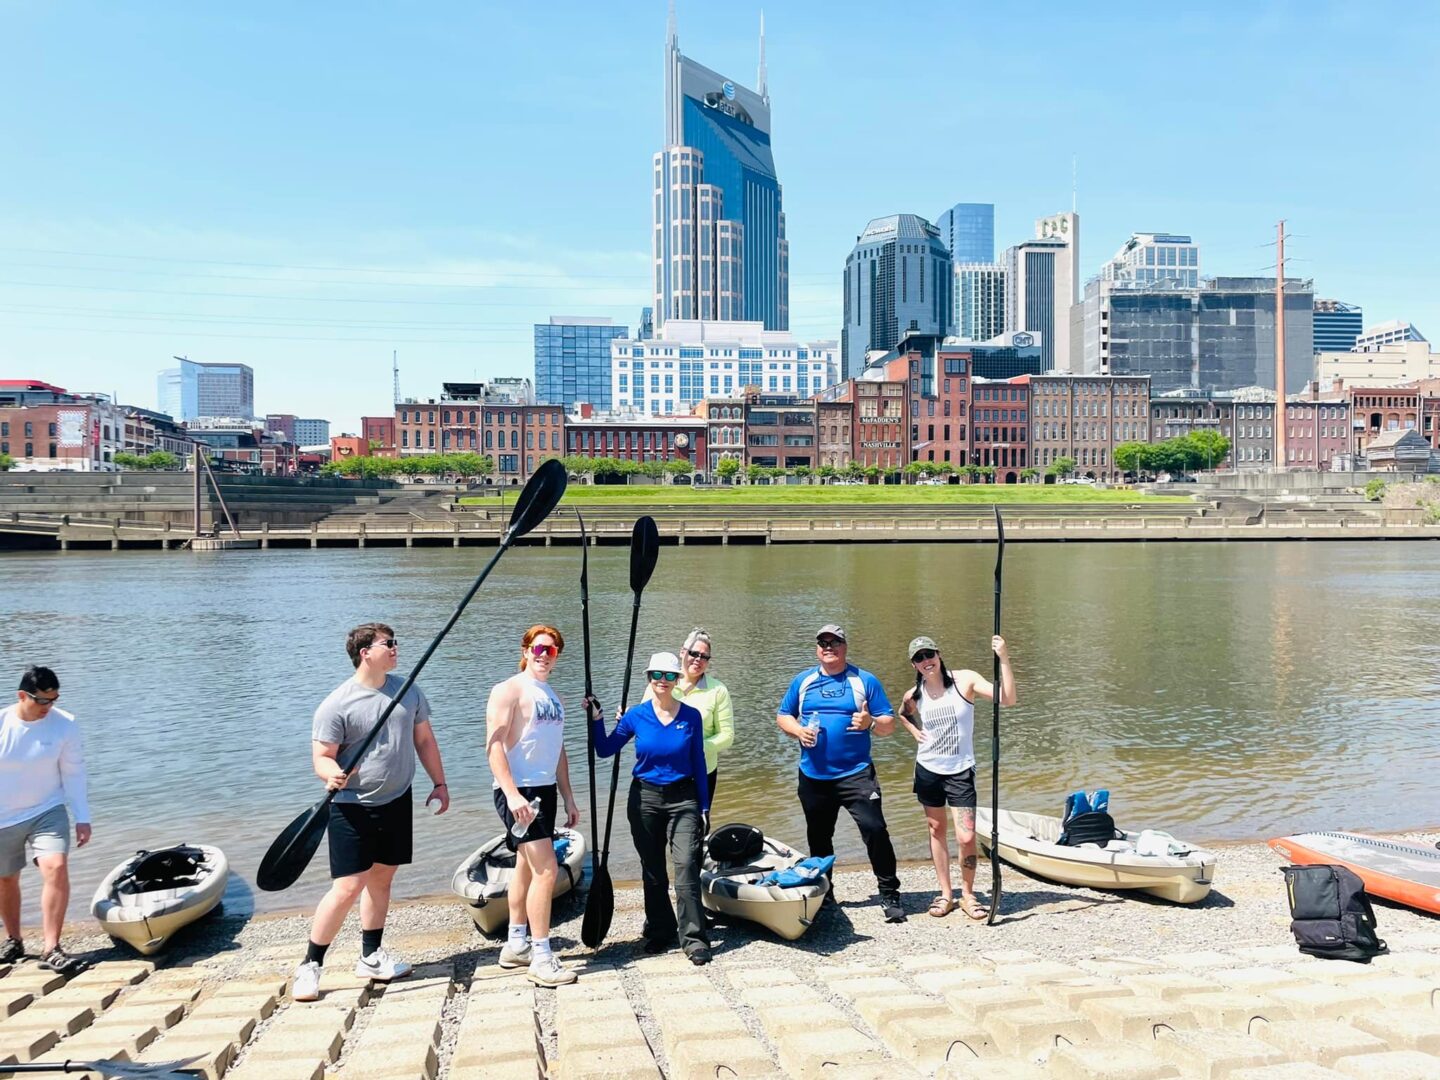 45 Unique things to do in Nashville Experiences You Won't Find Anywhere Else - Kayaking and Paddleboarding on the Cumberland River